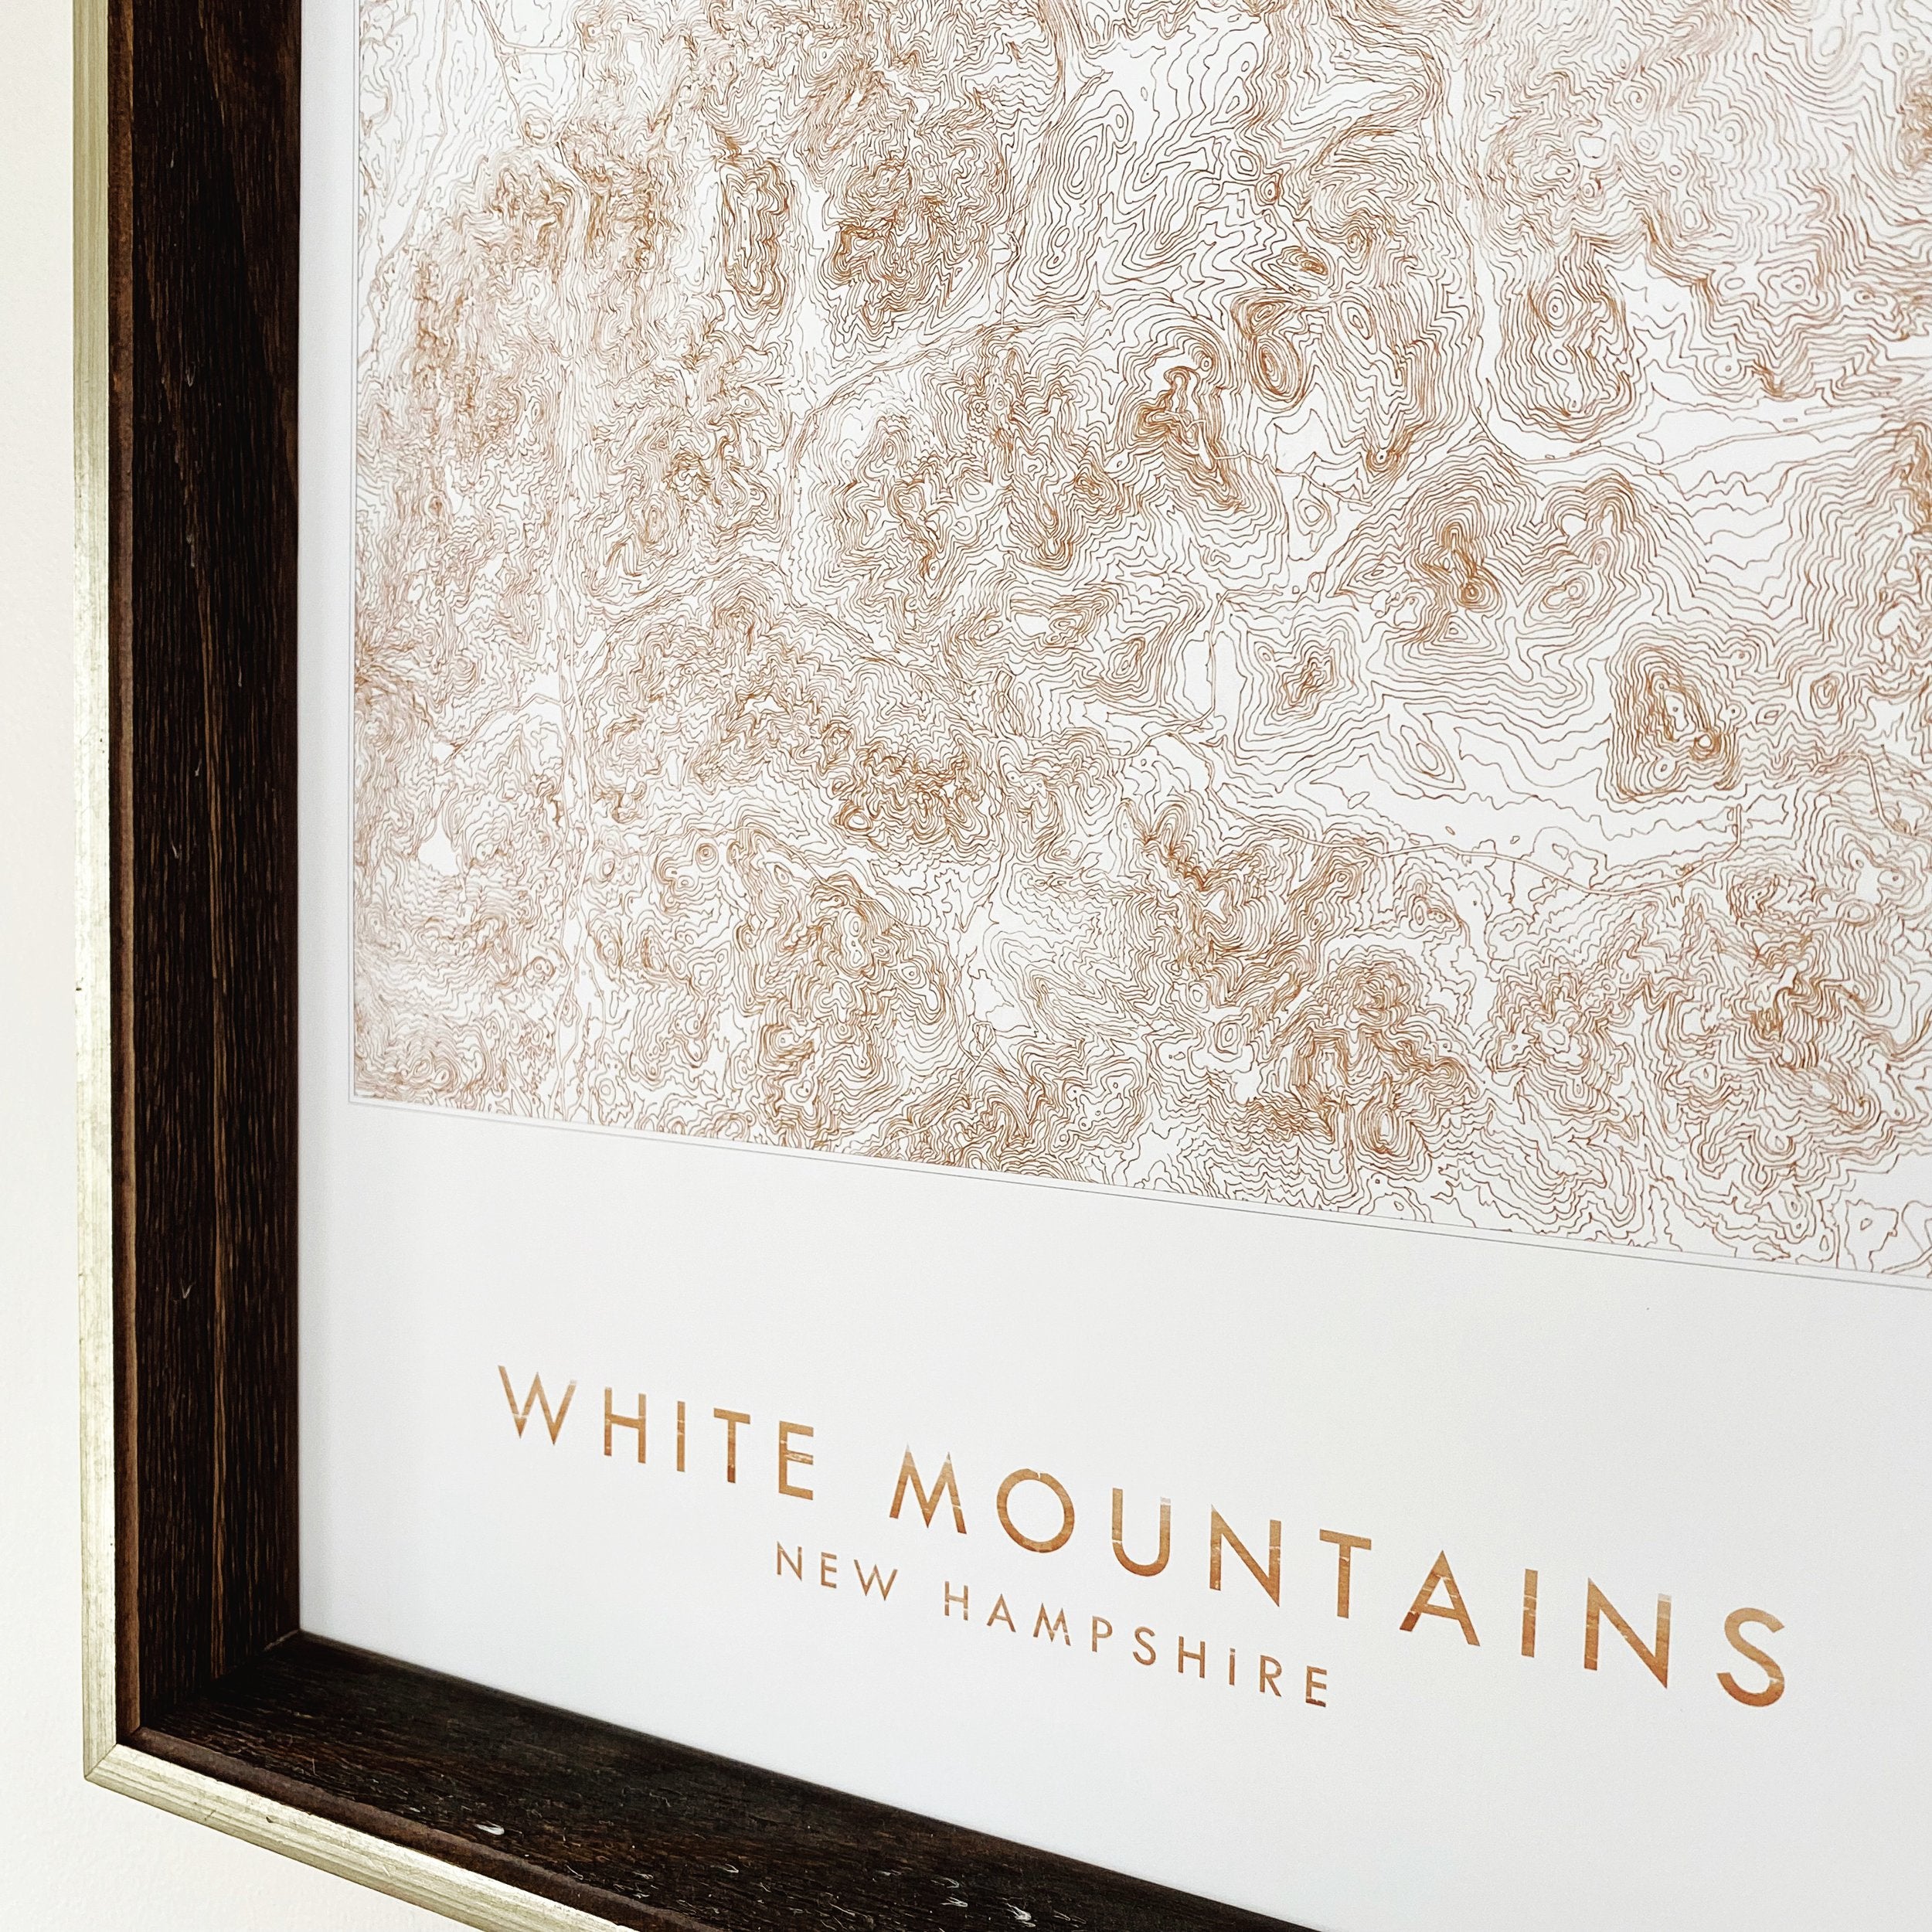 White Mountains NEW HAMPSHIRE Topographical Map Drawing: PRINT  (Brown)